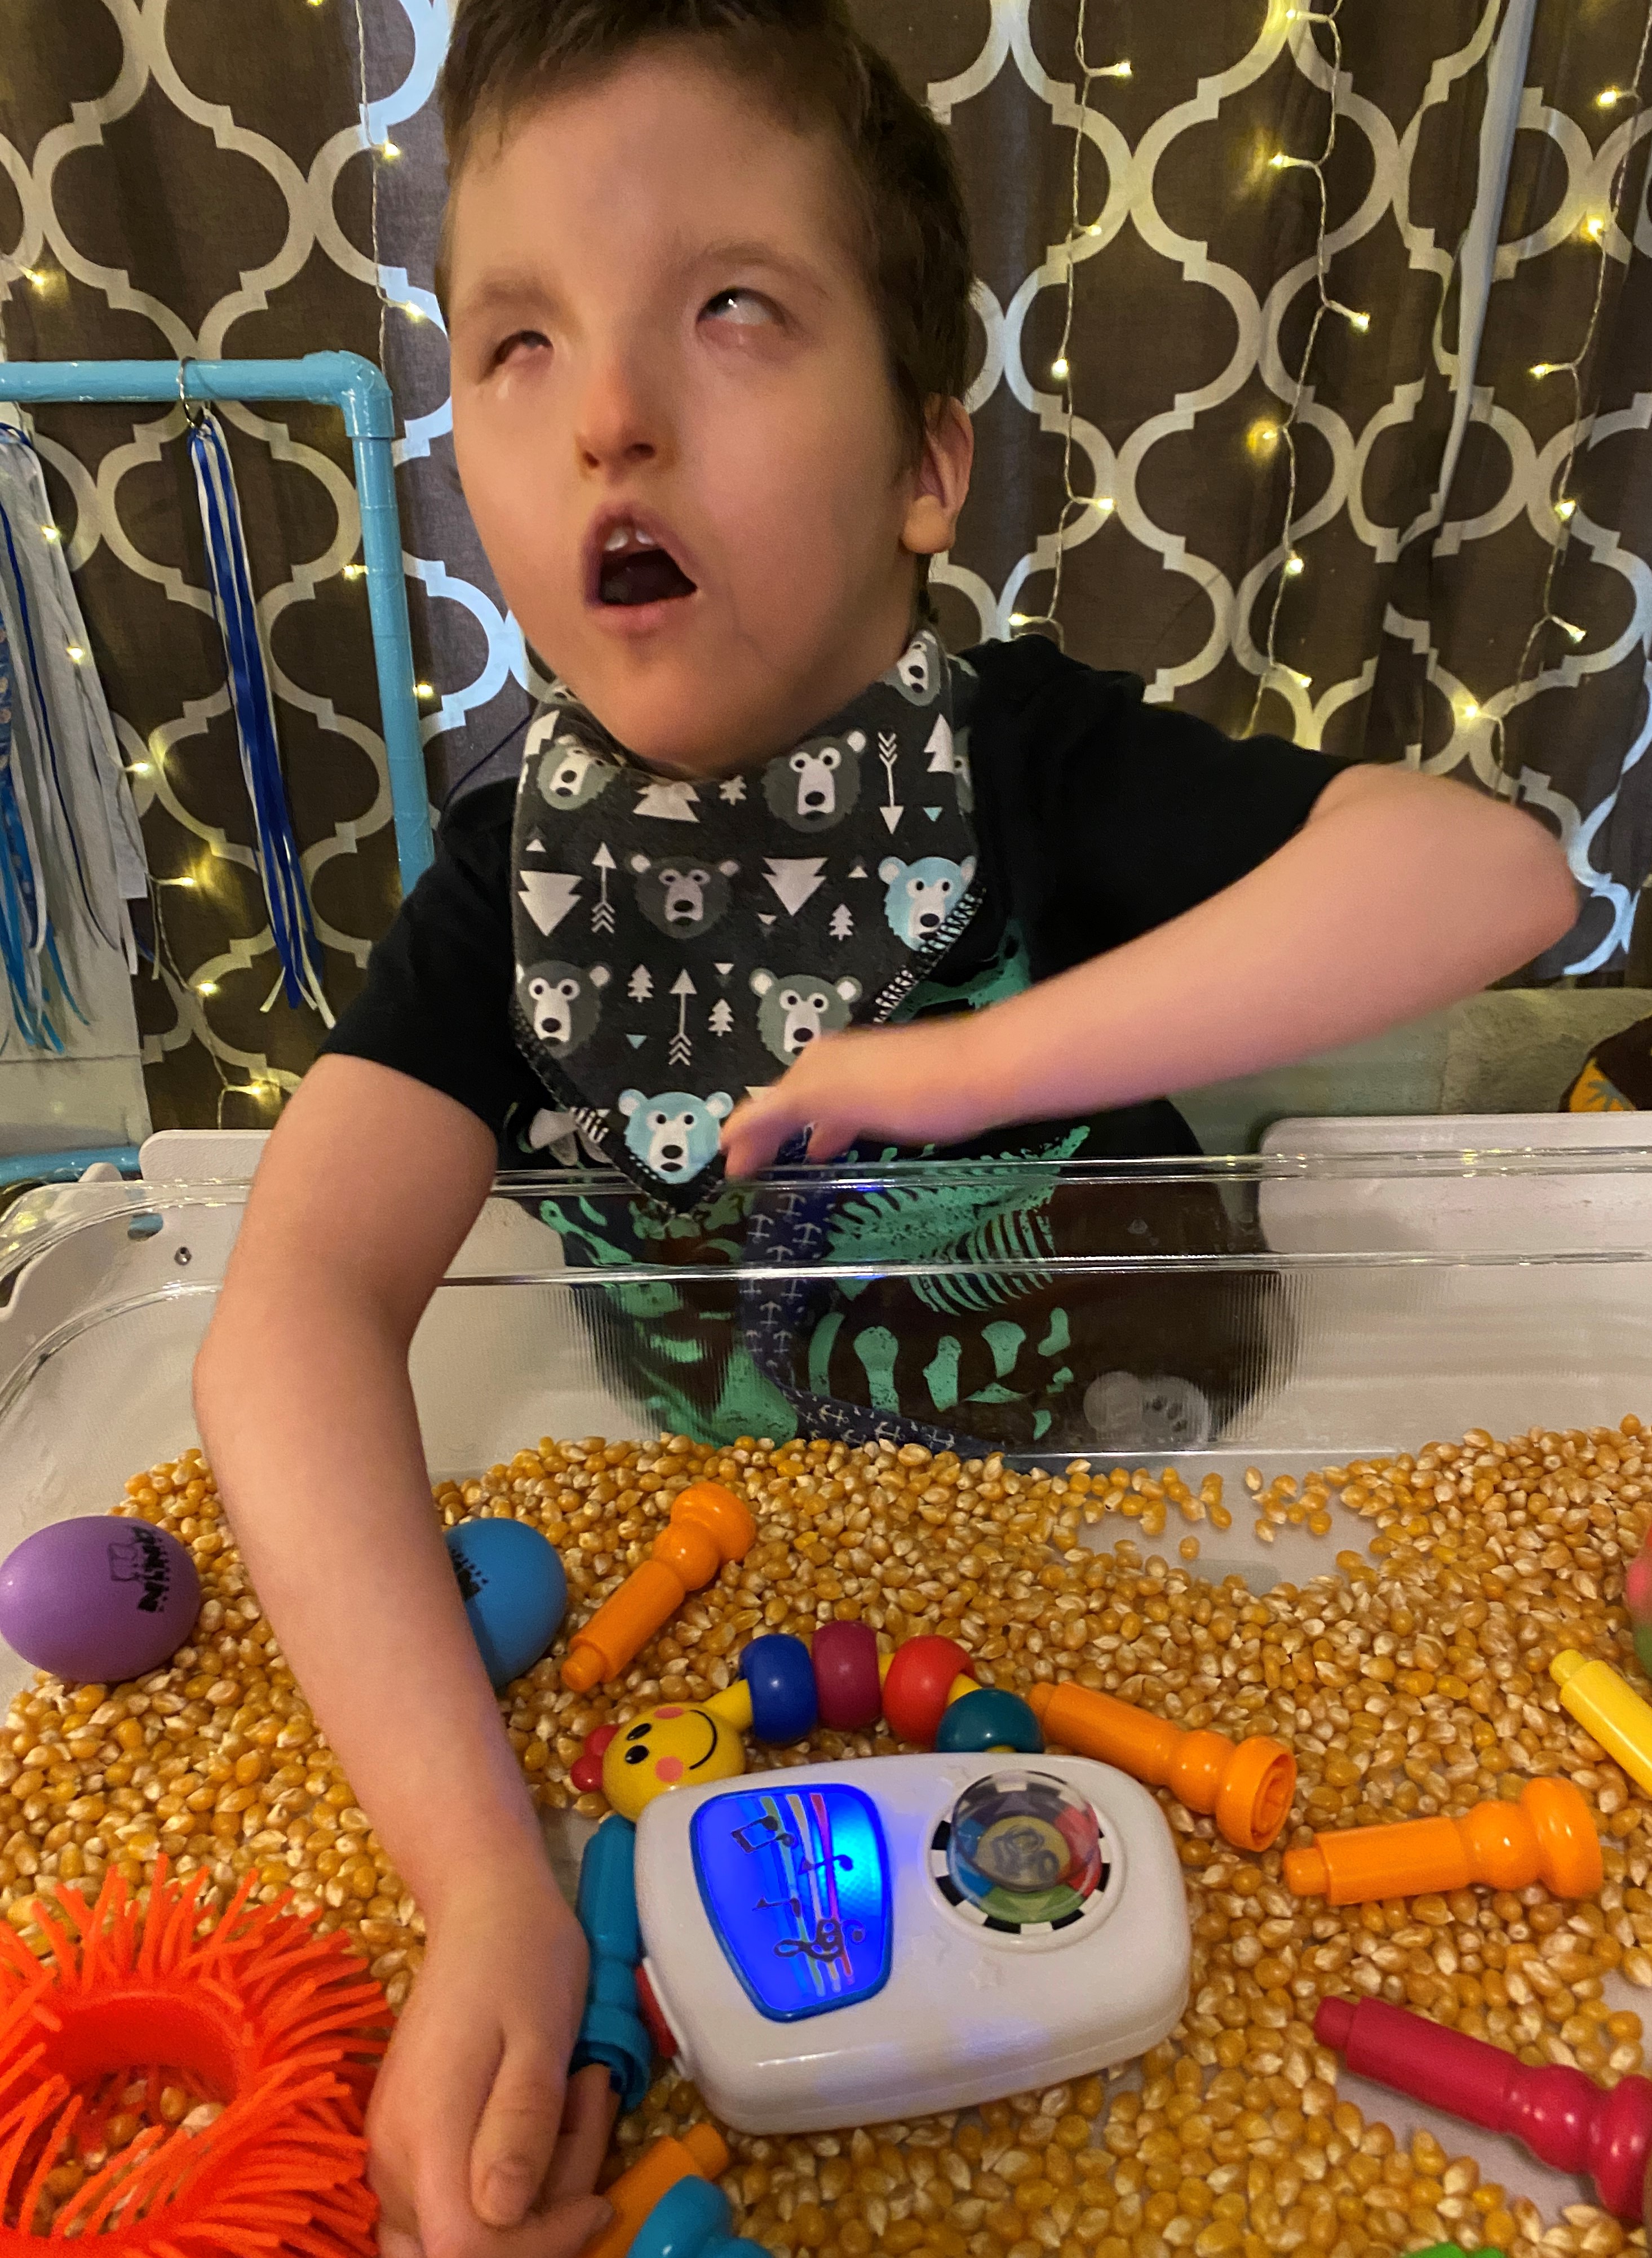 A boy with a visual impairment, about 8 years old, handling colorful toys in a clear box. The box also contains popcorn kernels.